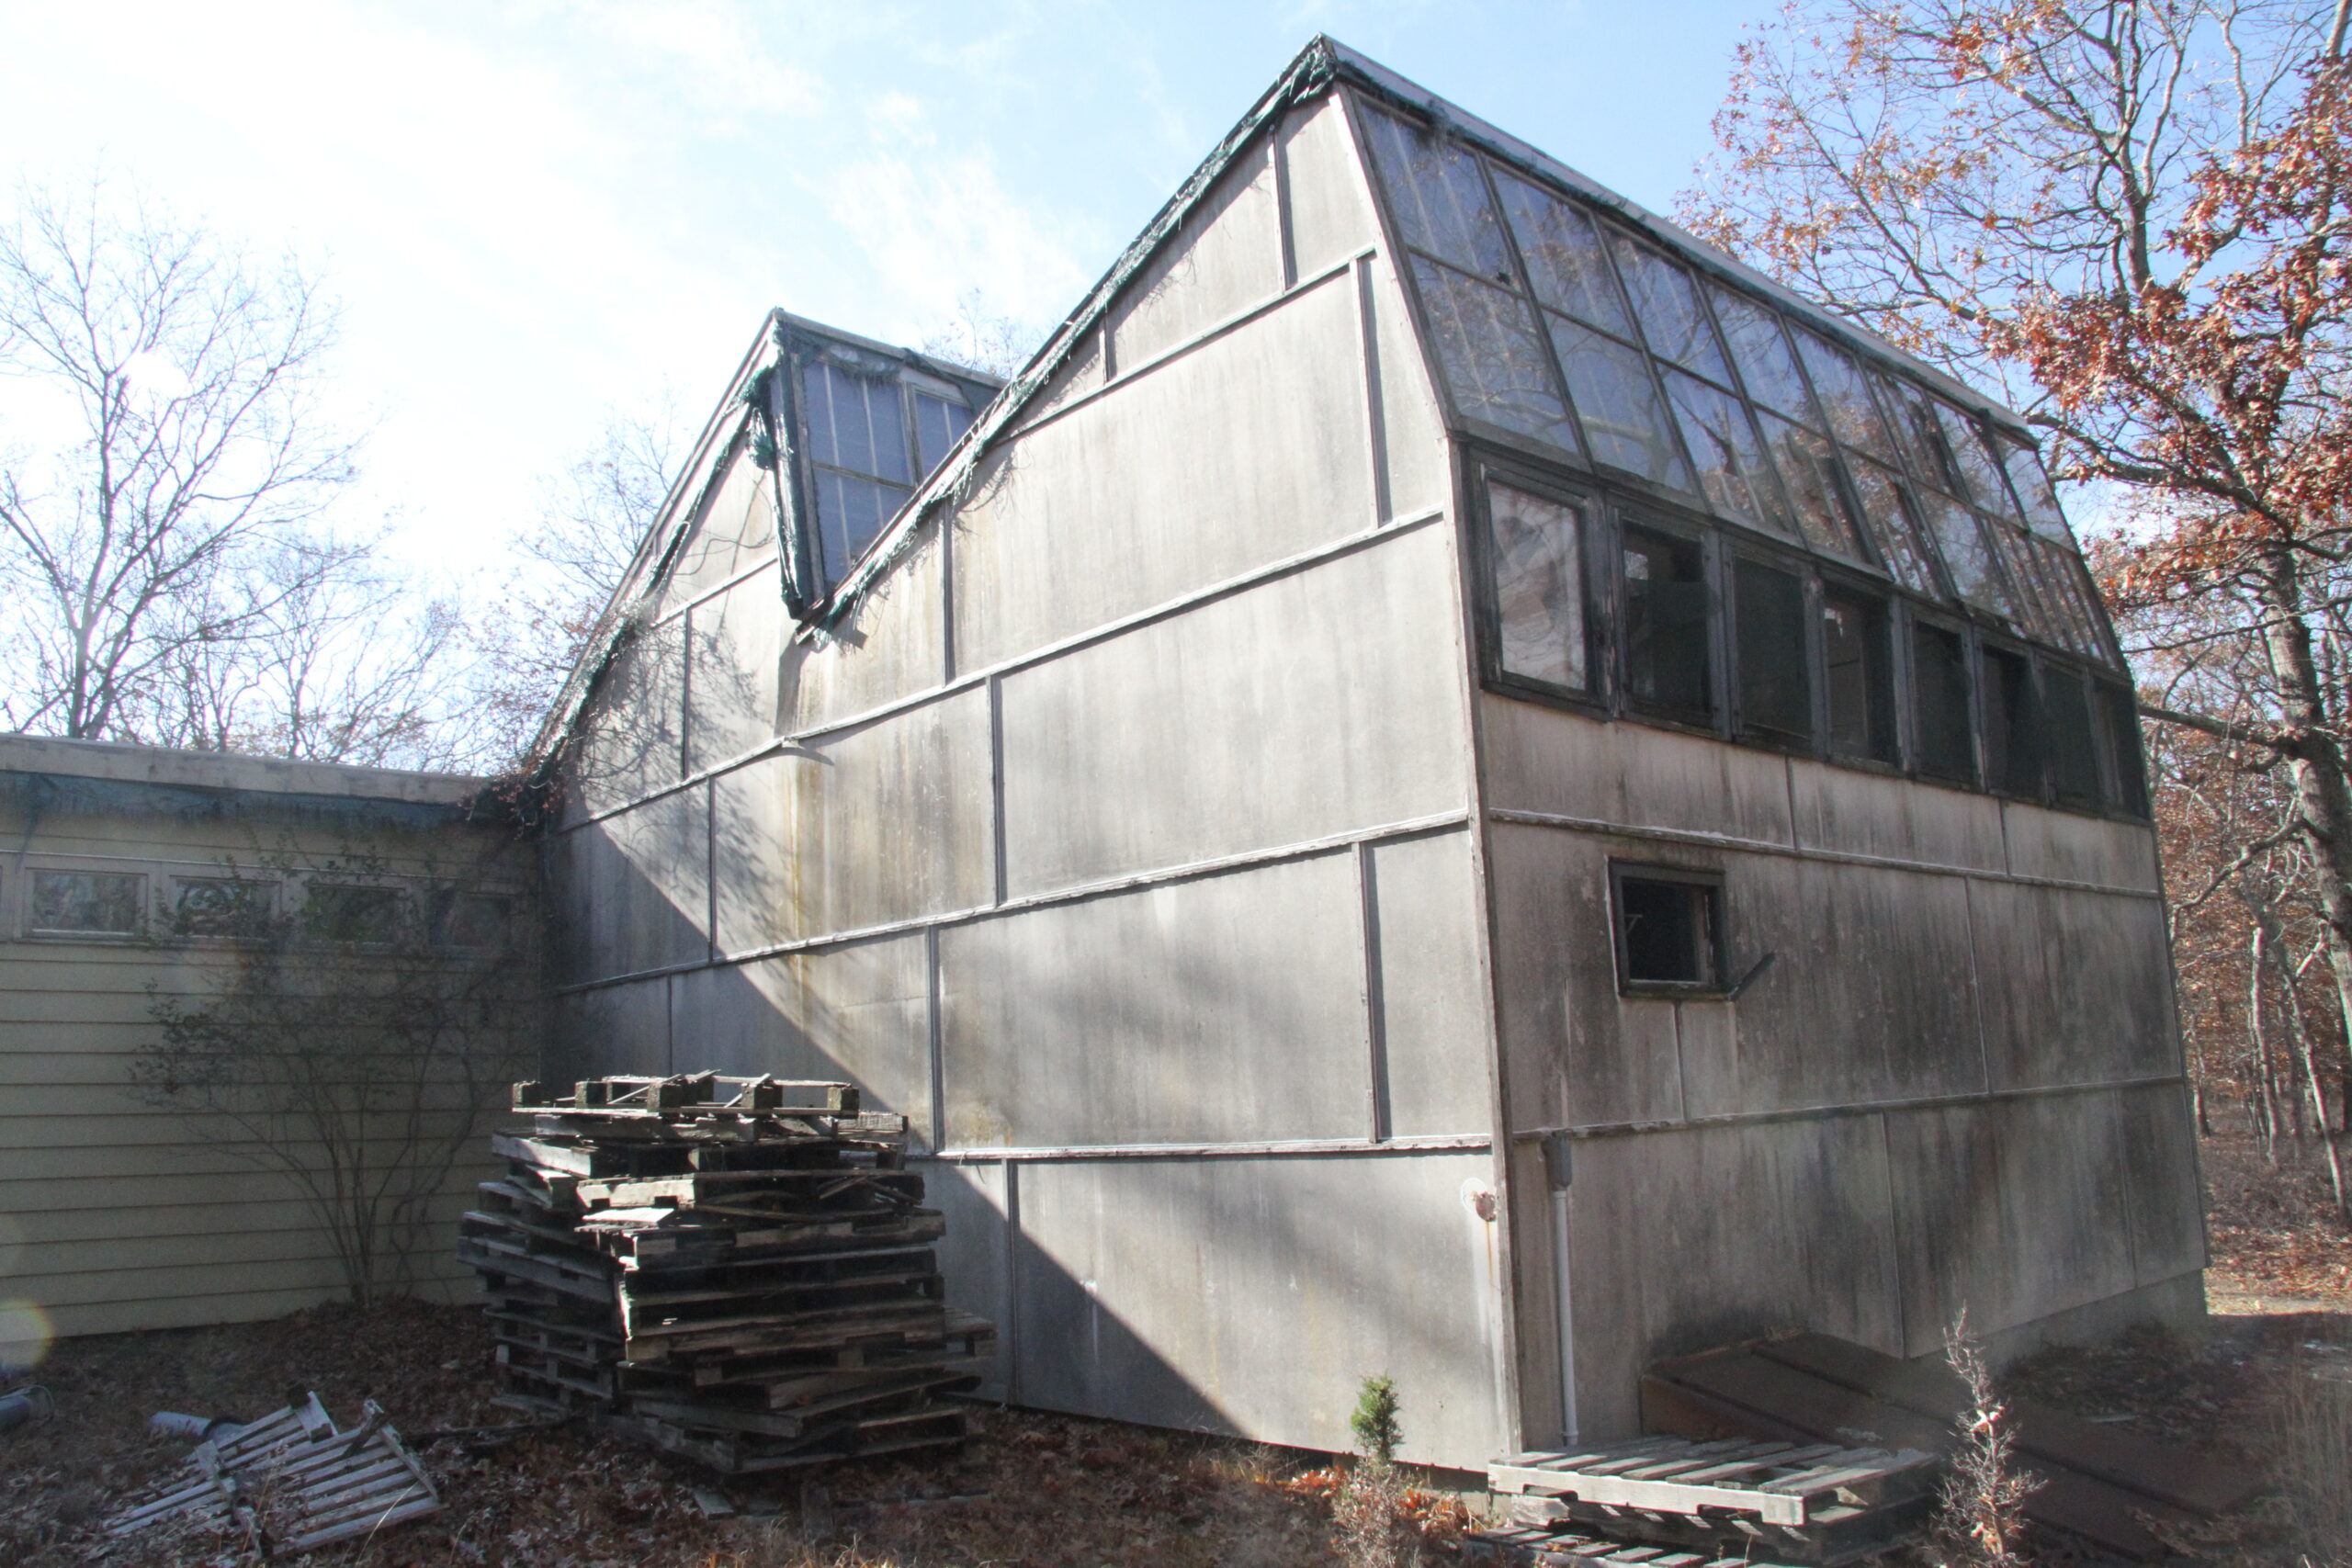 James Brooks built his art studio in Springs himself, mainly out of plywood. But the structure has deteriorated in recent years and is on the verge of collapse. An engineer has said it cannot be saved as it stands but could be rebuilt with a mix of new and old materials.